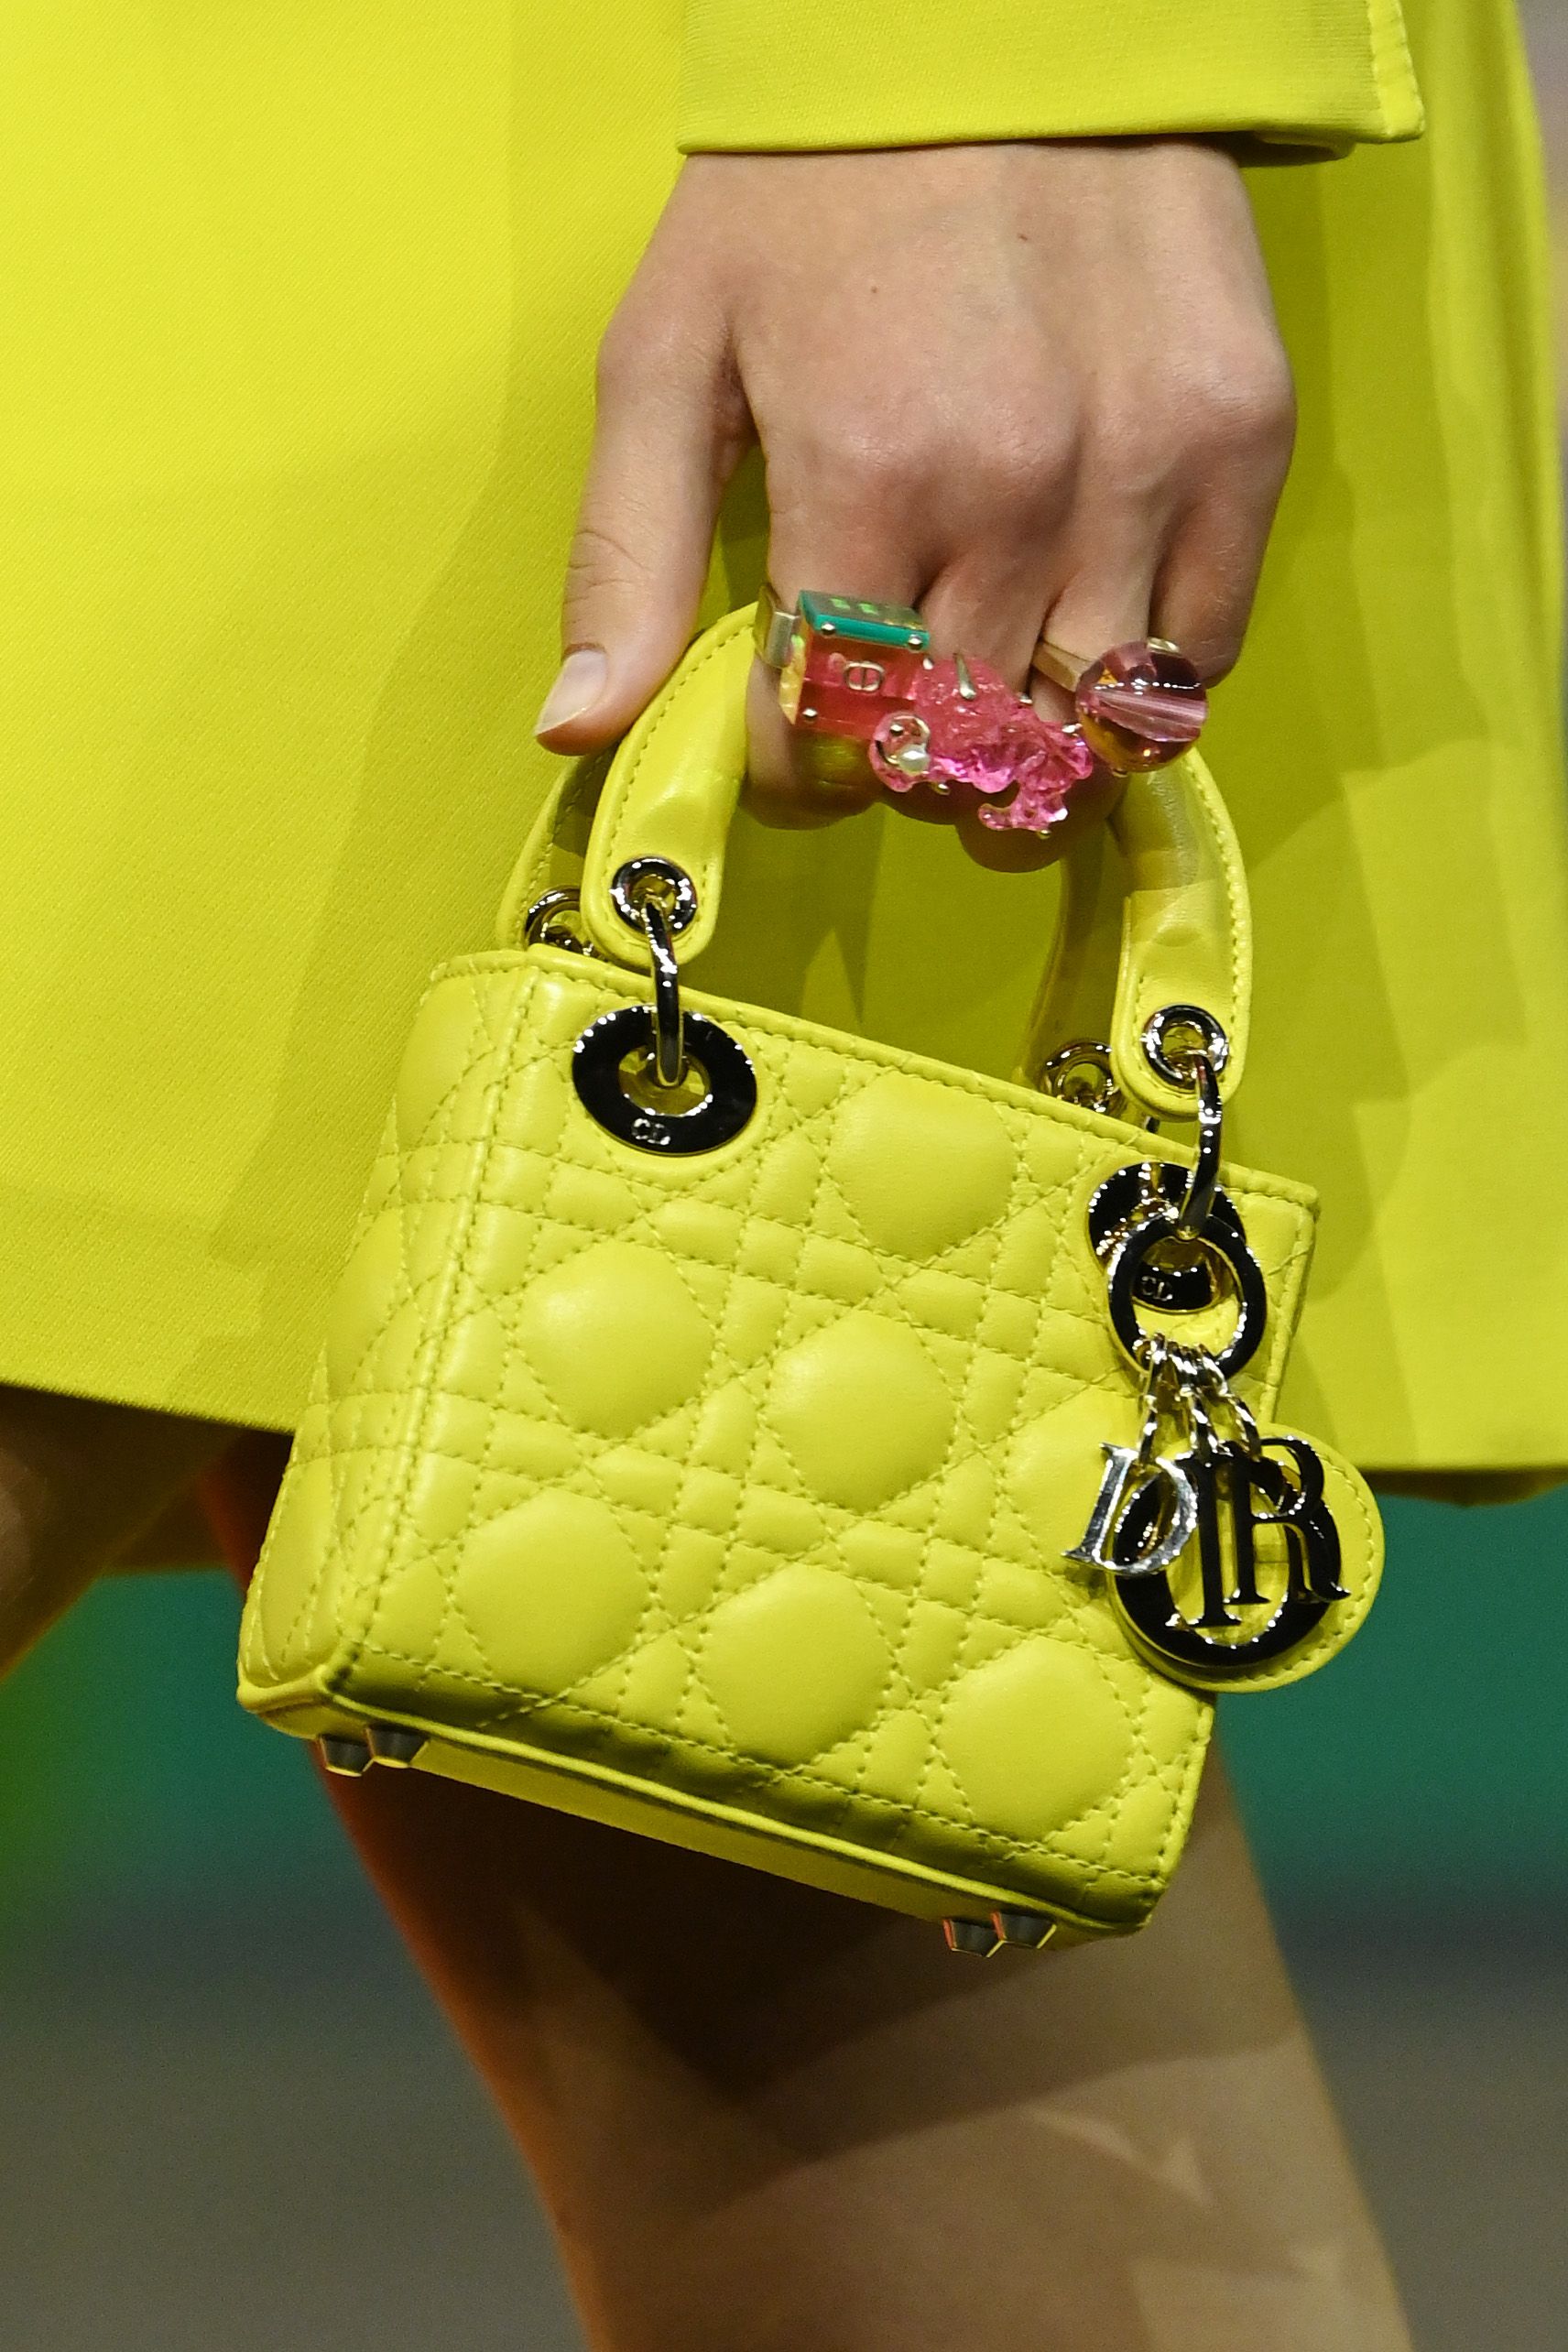 In Your Bag: Bag Trends To Try For Summer